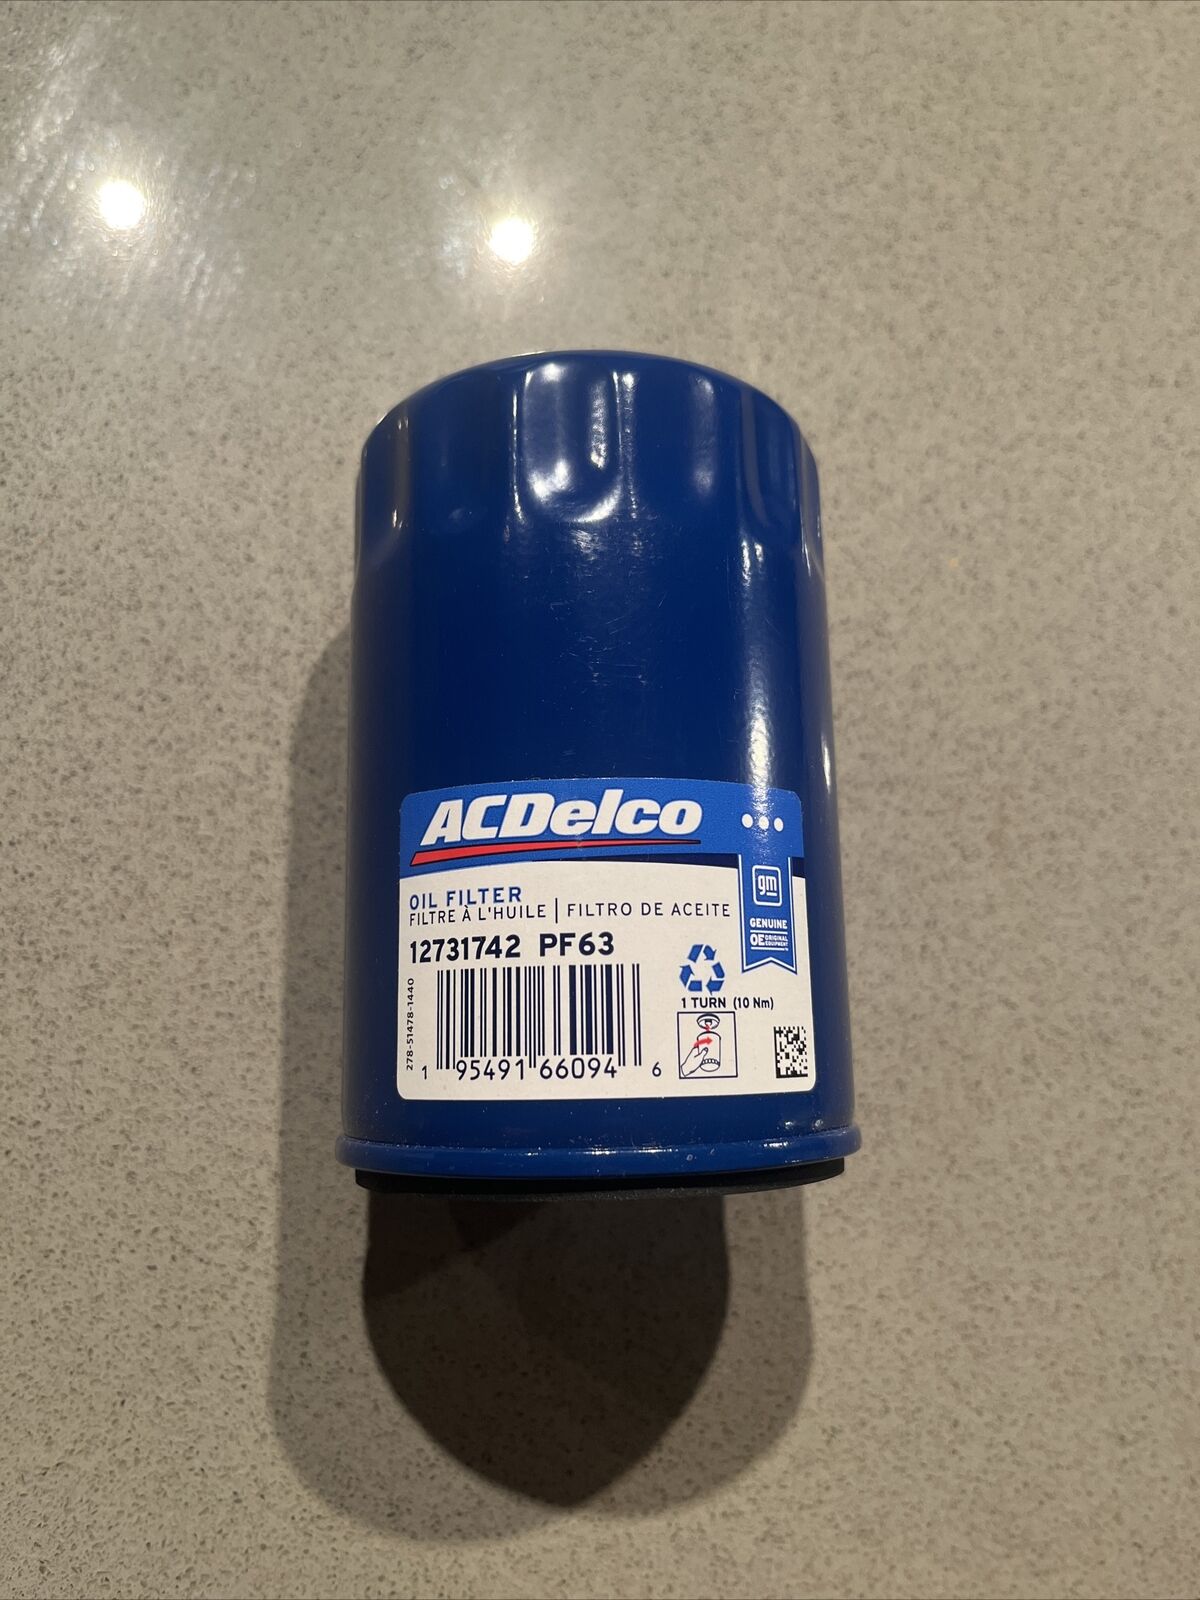 ACDELCO OIL FILTER 12731742 PF63 FOR GM